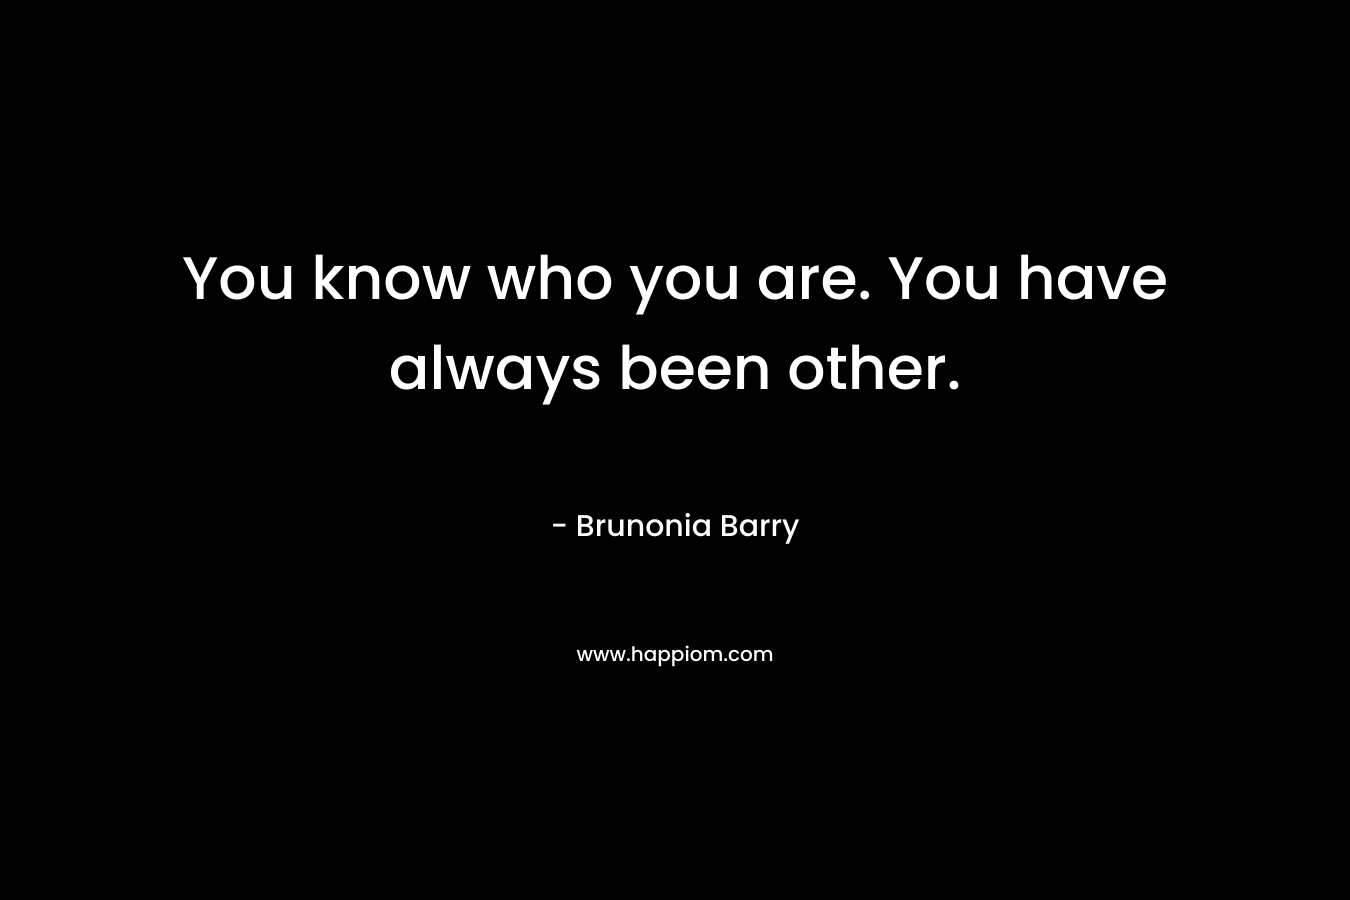 You know who you are. You have always been other. – Brunonia Barry